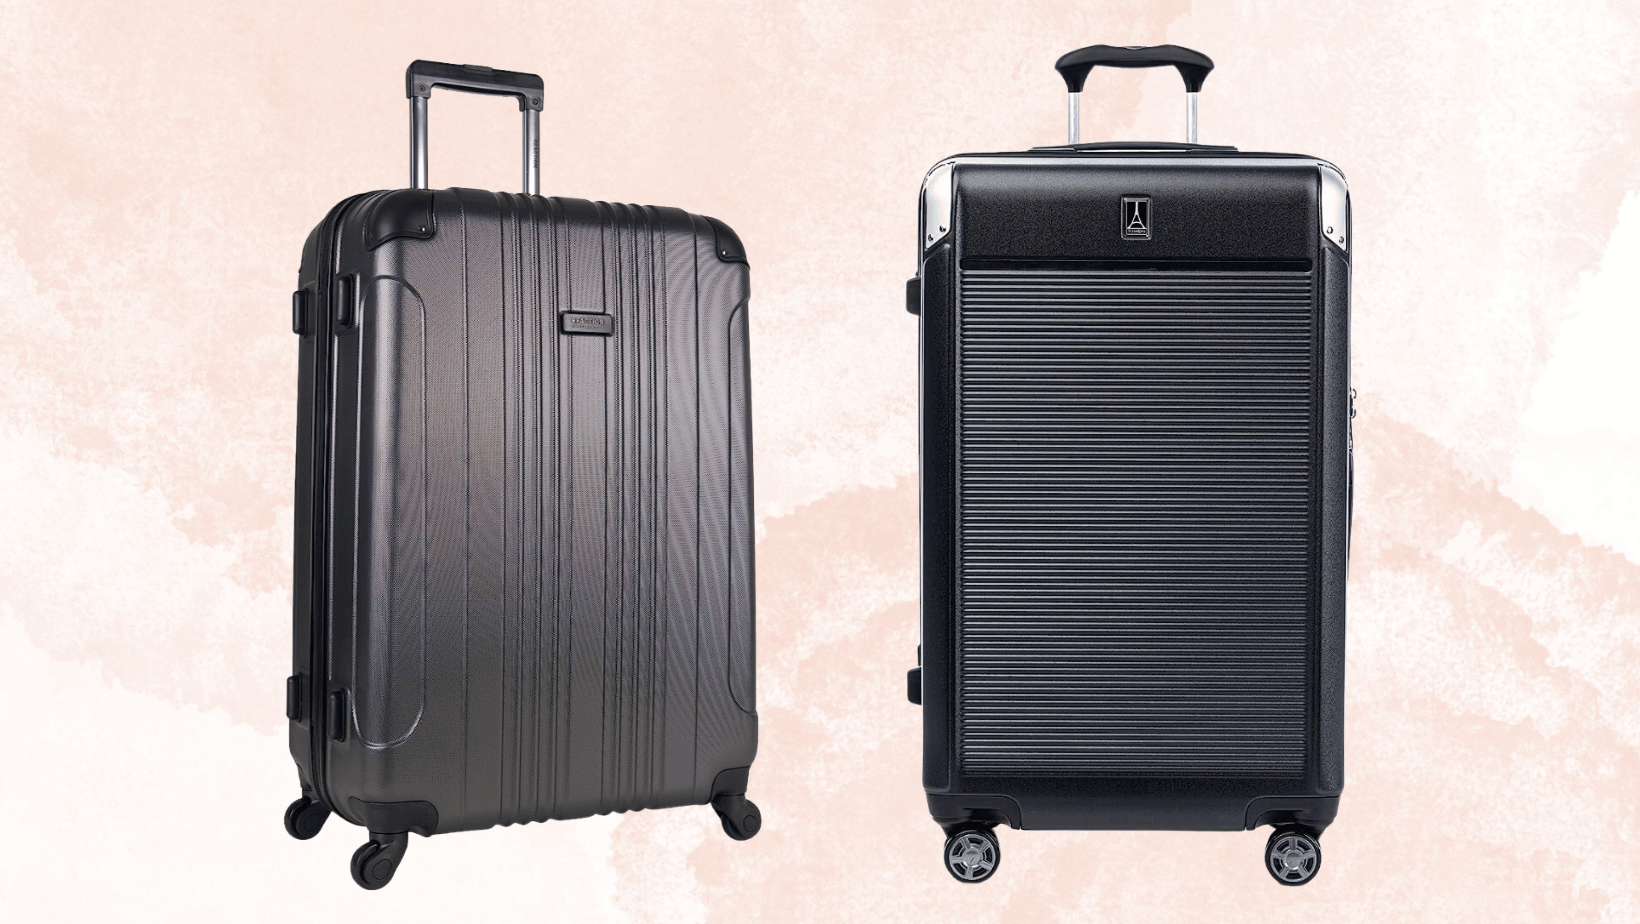 62 linear inches luggage